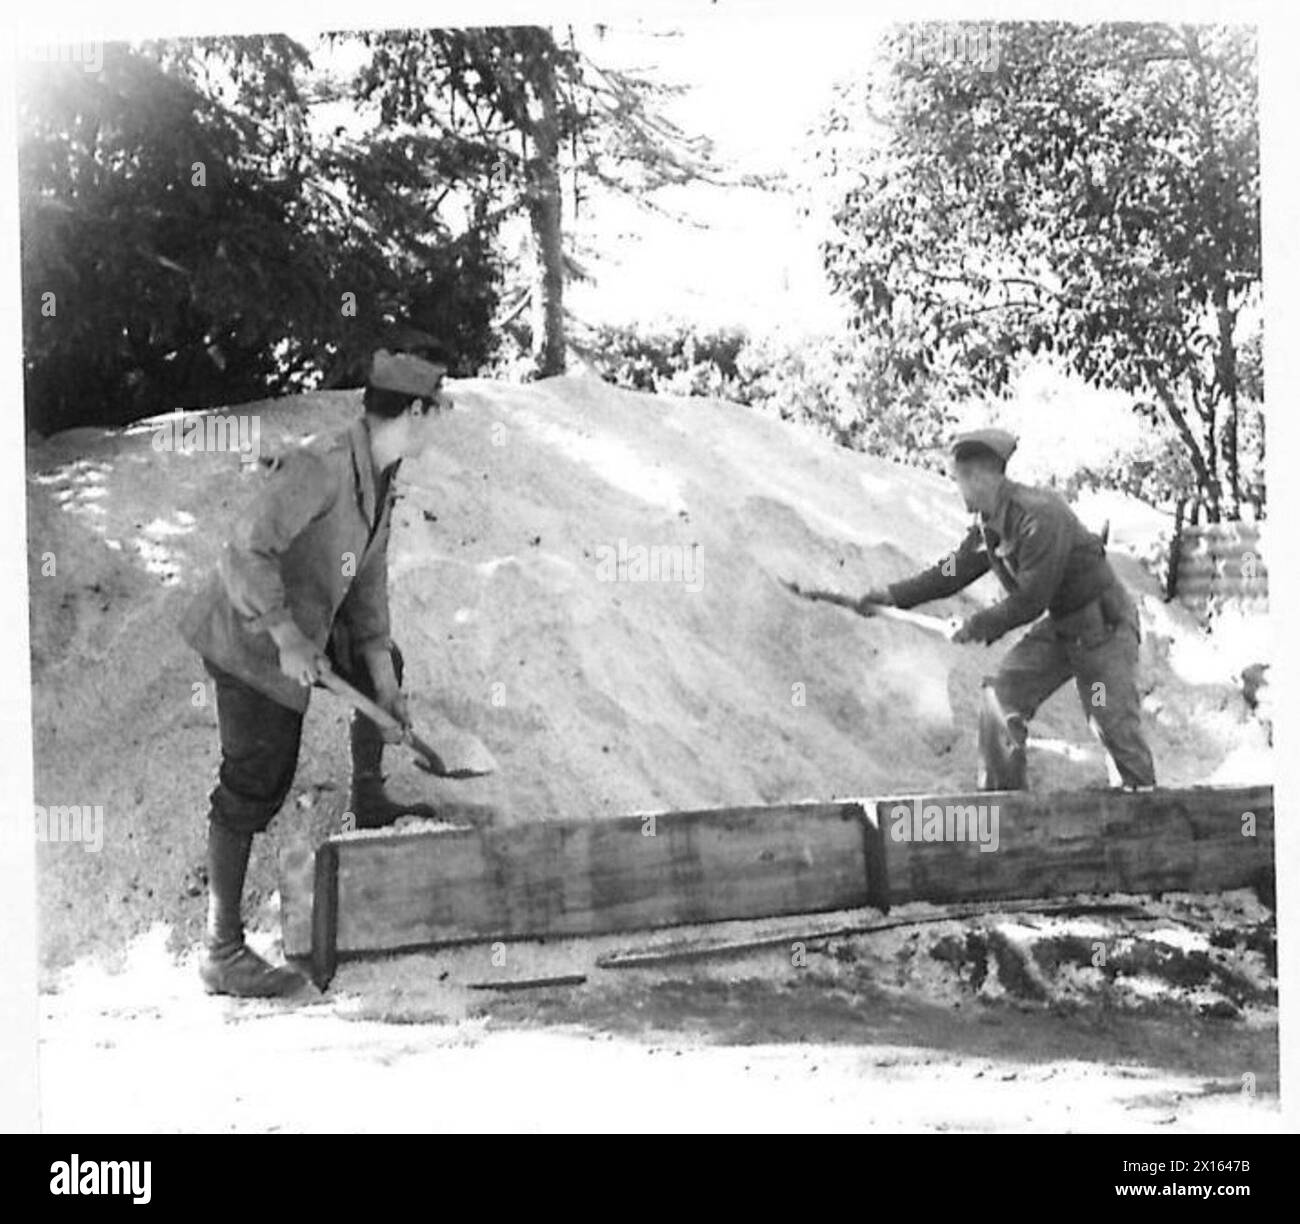 ITALY : EIGHTH ARMY ENTERTAINMENT TOWN - 8th Army prepared for the winter. An Italian and a British soldier work on a huge pile of salt, stored in an Engineer's dump near Campbbassa ready for frosty roads and corners. So scarce and highly prized is salt in Italy now that even this course salt has to be carefully guarded against civilian theft British Army Stock Photo